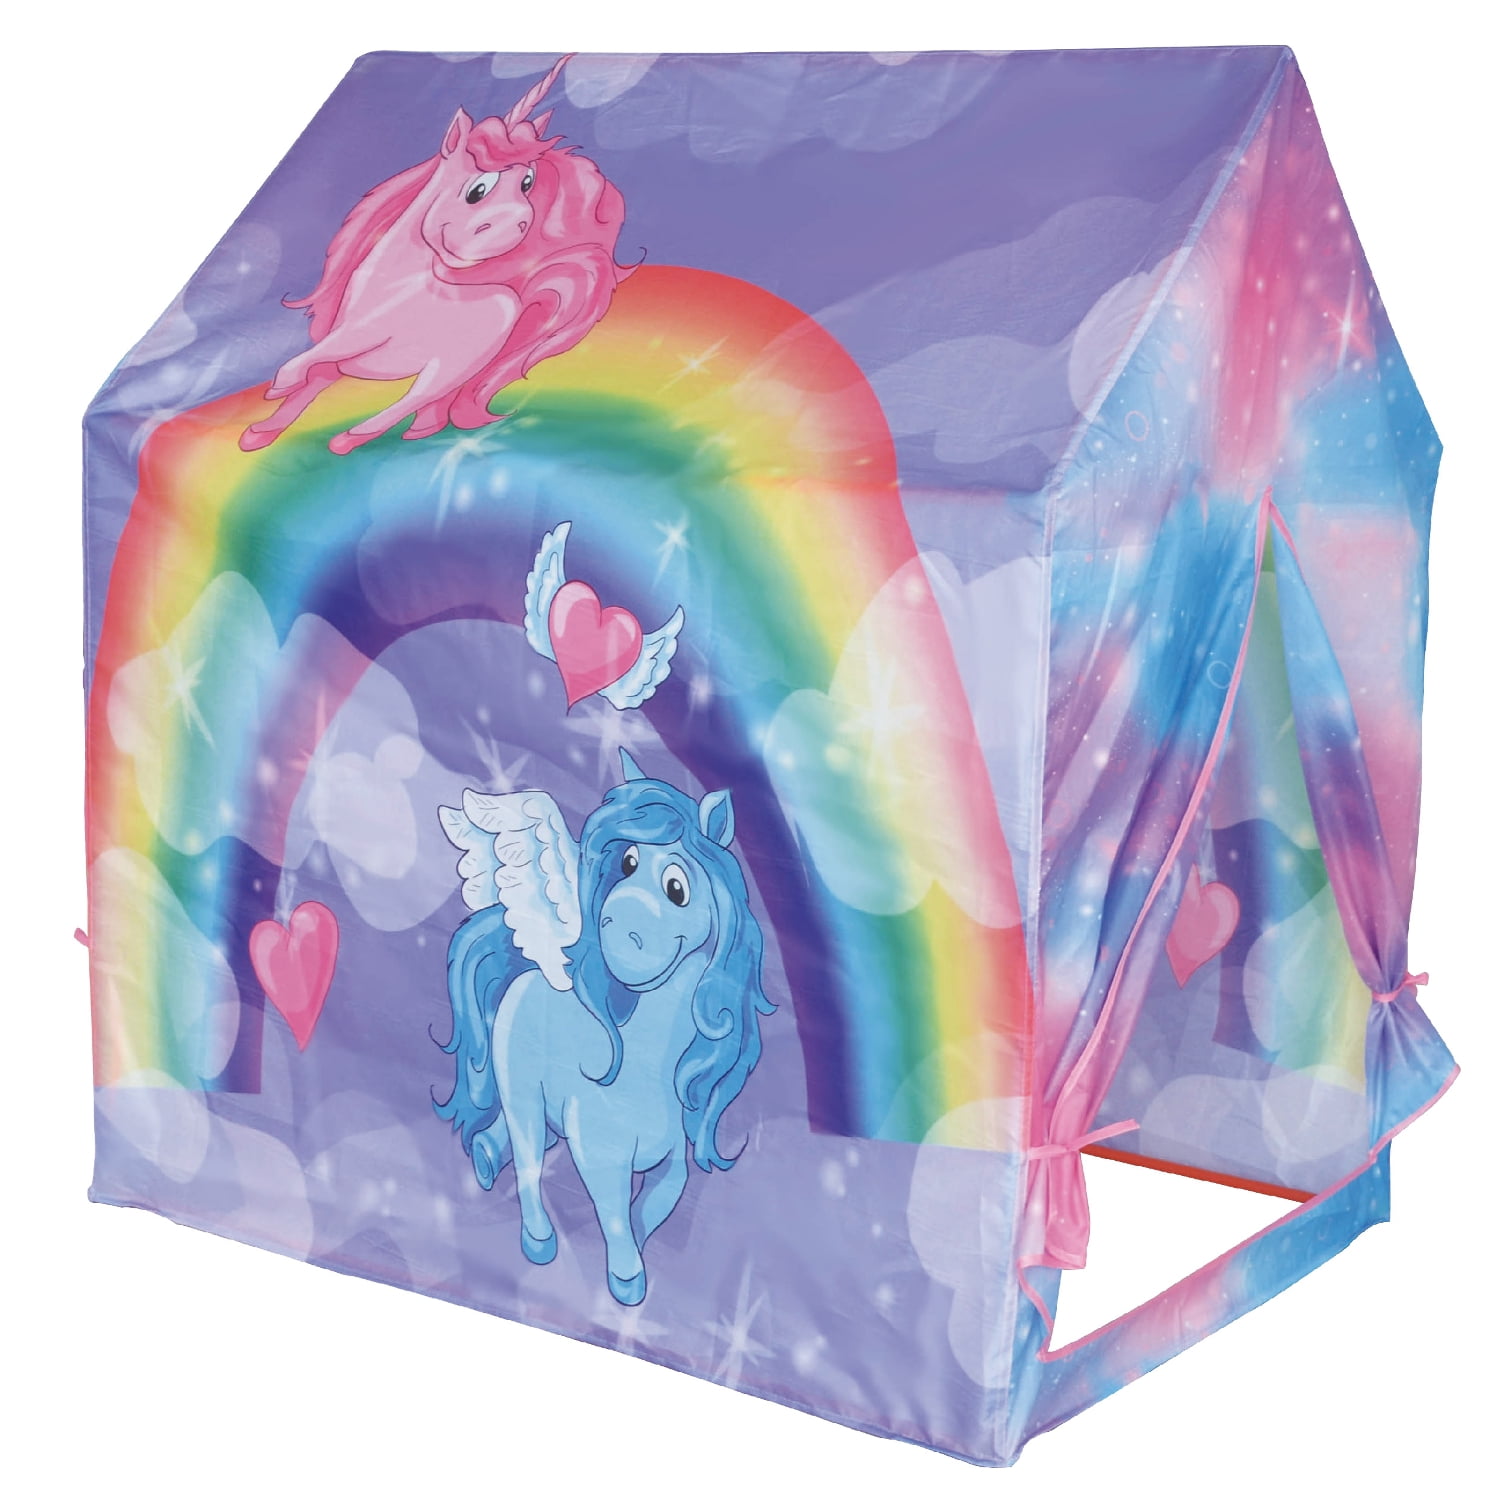 Kids Play Tent Unicorn Playhouse For Children Indoor And Outdoor Fun,Roomy Enoug 